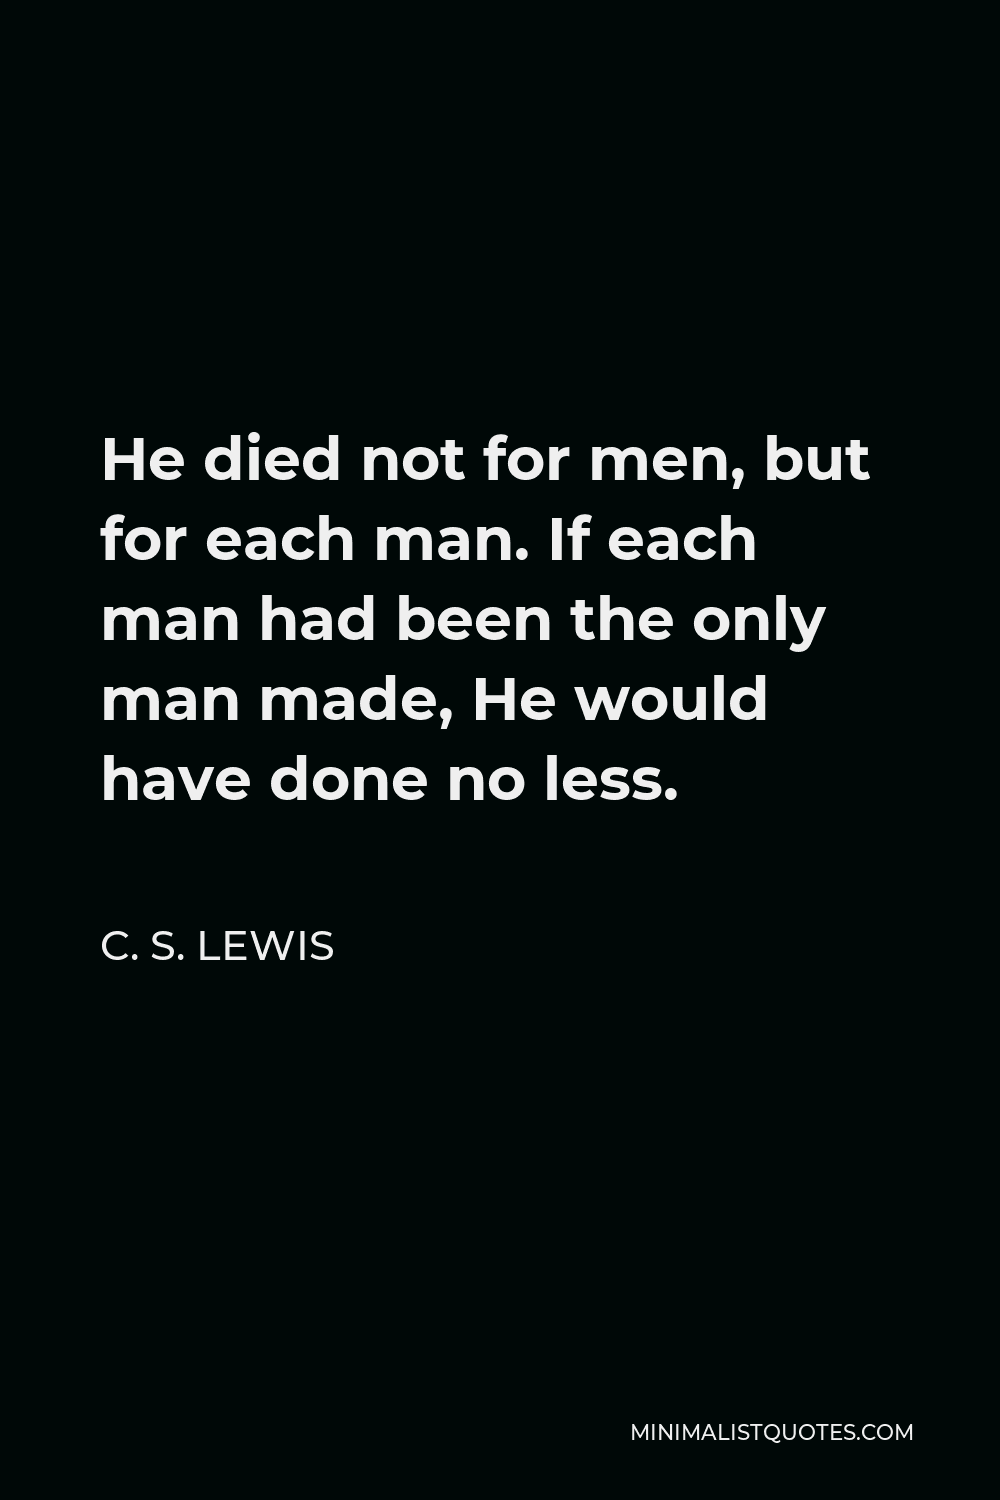 C. S. Lewis Quote - He died not for men, but for each man. If each man had been the only man made, He would have done no less.